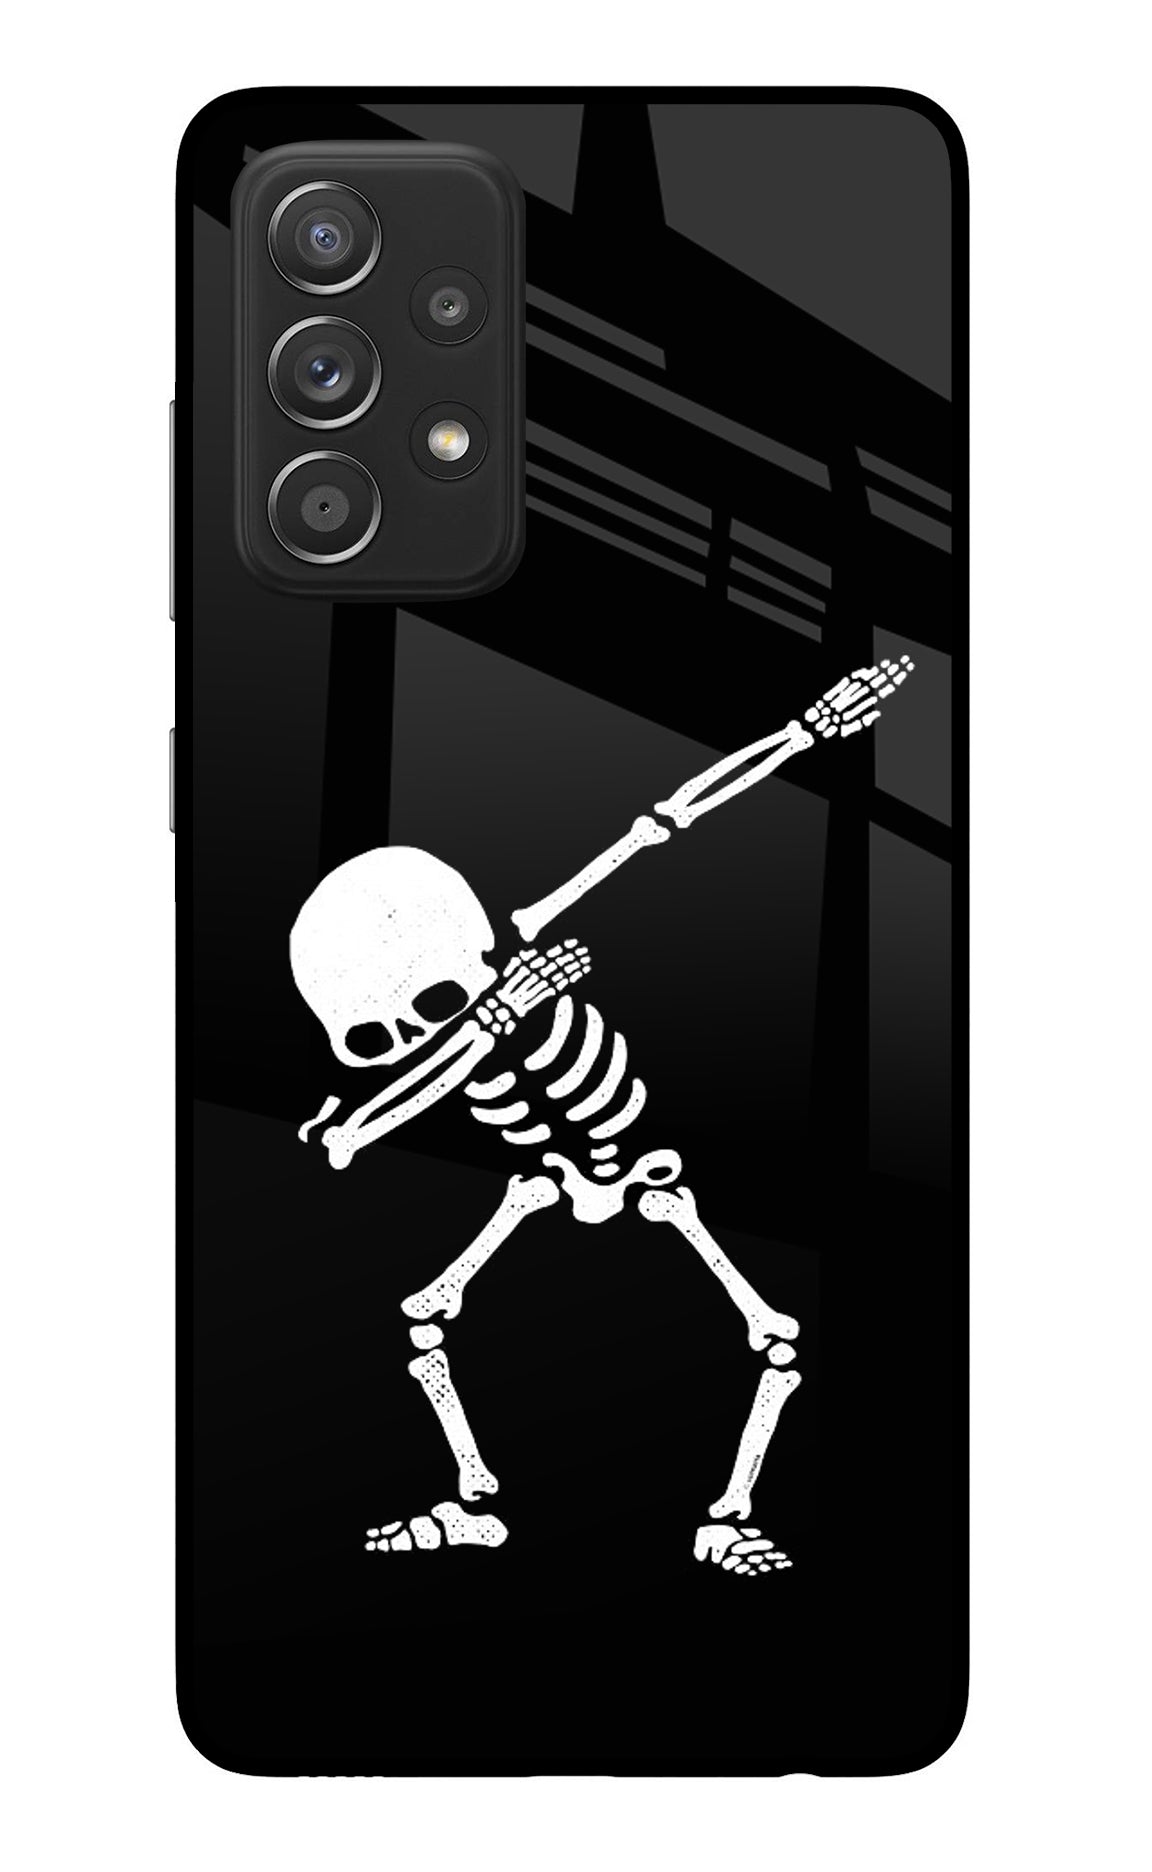 Dabbing Skeleton Art Samsung A52/A52s 5G Back Cover